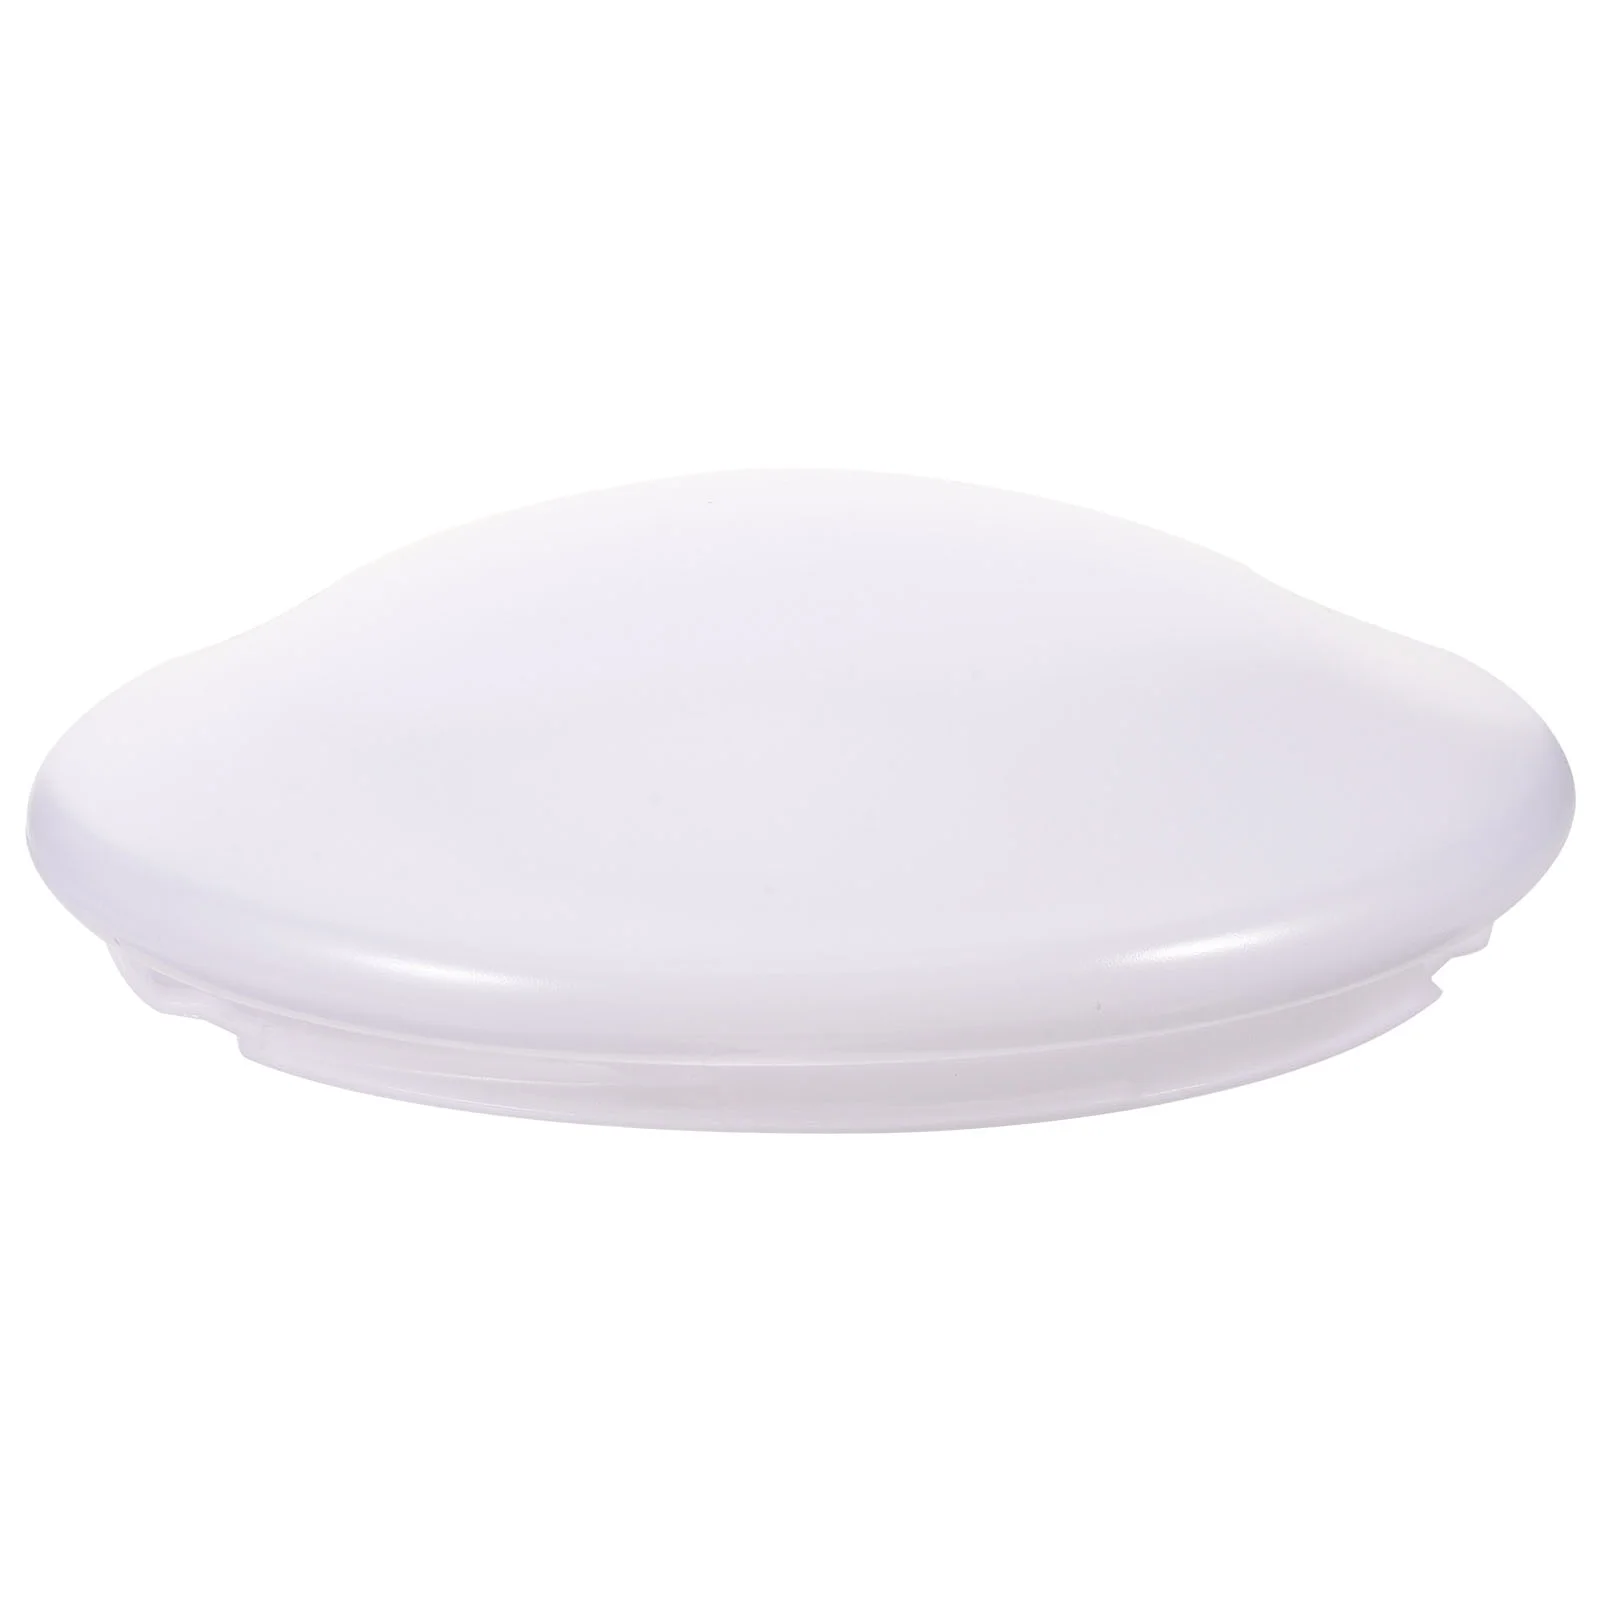 Ceiling Light Shade Plastic Ceiling Plate Cover White Opal Mushroom Glass Shade Ceiling Fixture Hanging Ceiling Lights Shade 20pcs led square panel glass dimmable 6w 12w 18w led downlight cover lights high bright ceiling recessed lamps ac85 265 driver